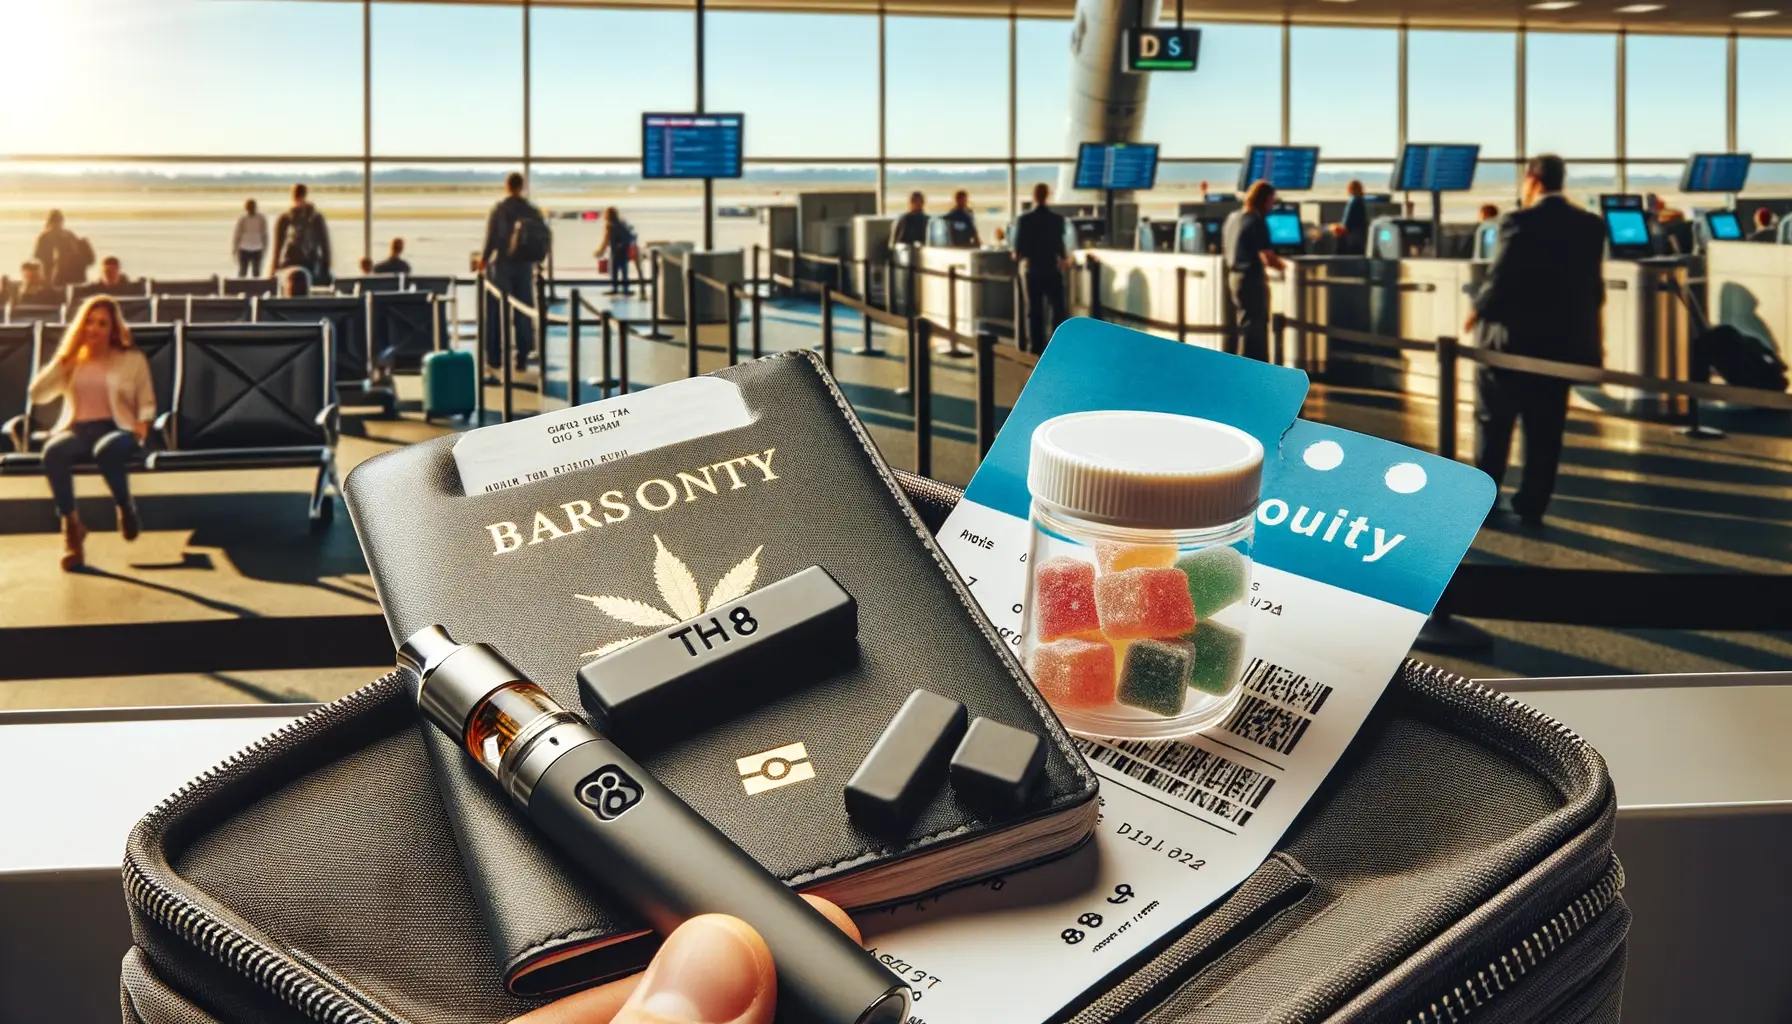 An image featuring various items related to air travel and delta 8 THC products. In the foreground, there's a delta 8 vape pen, a boarding pass, and a small container of delta 8 gummies. The background shows a blurred view of an airport with people, a security checkpoint in the distance, and a clear sky visible through large windows. The image has a calm and informative tone, aiming to visually represent the concept of traveling with delta 8 THC products.